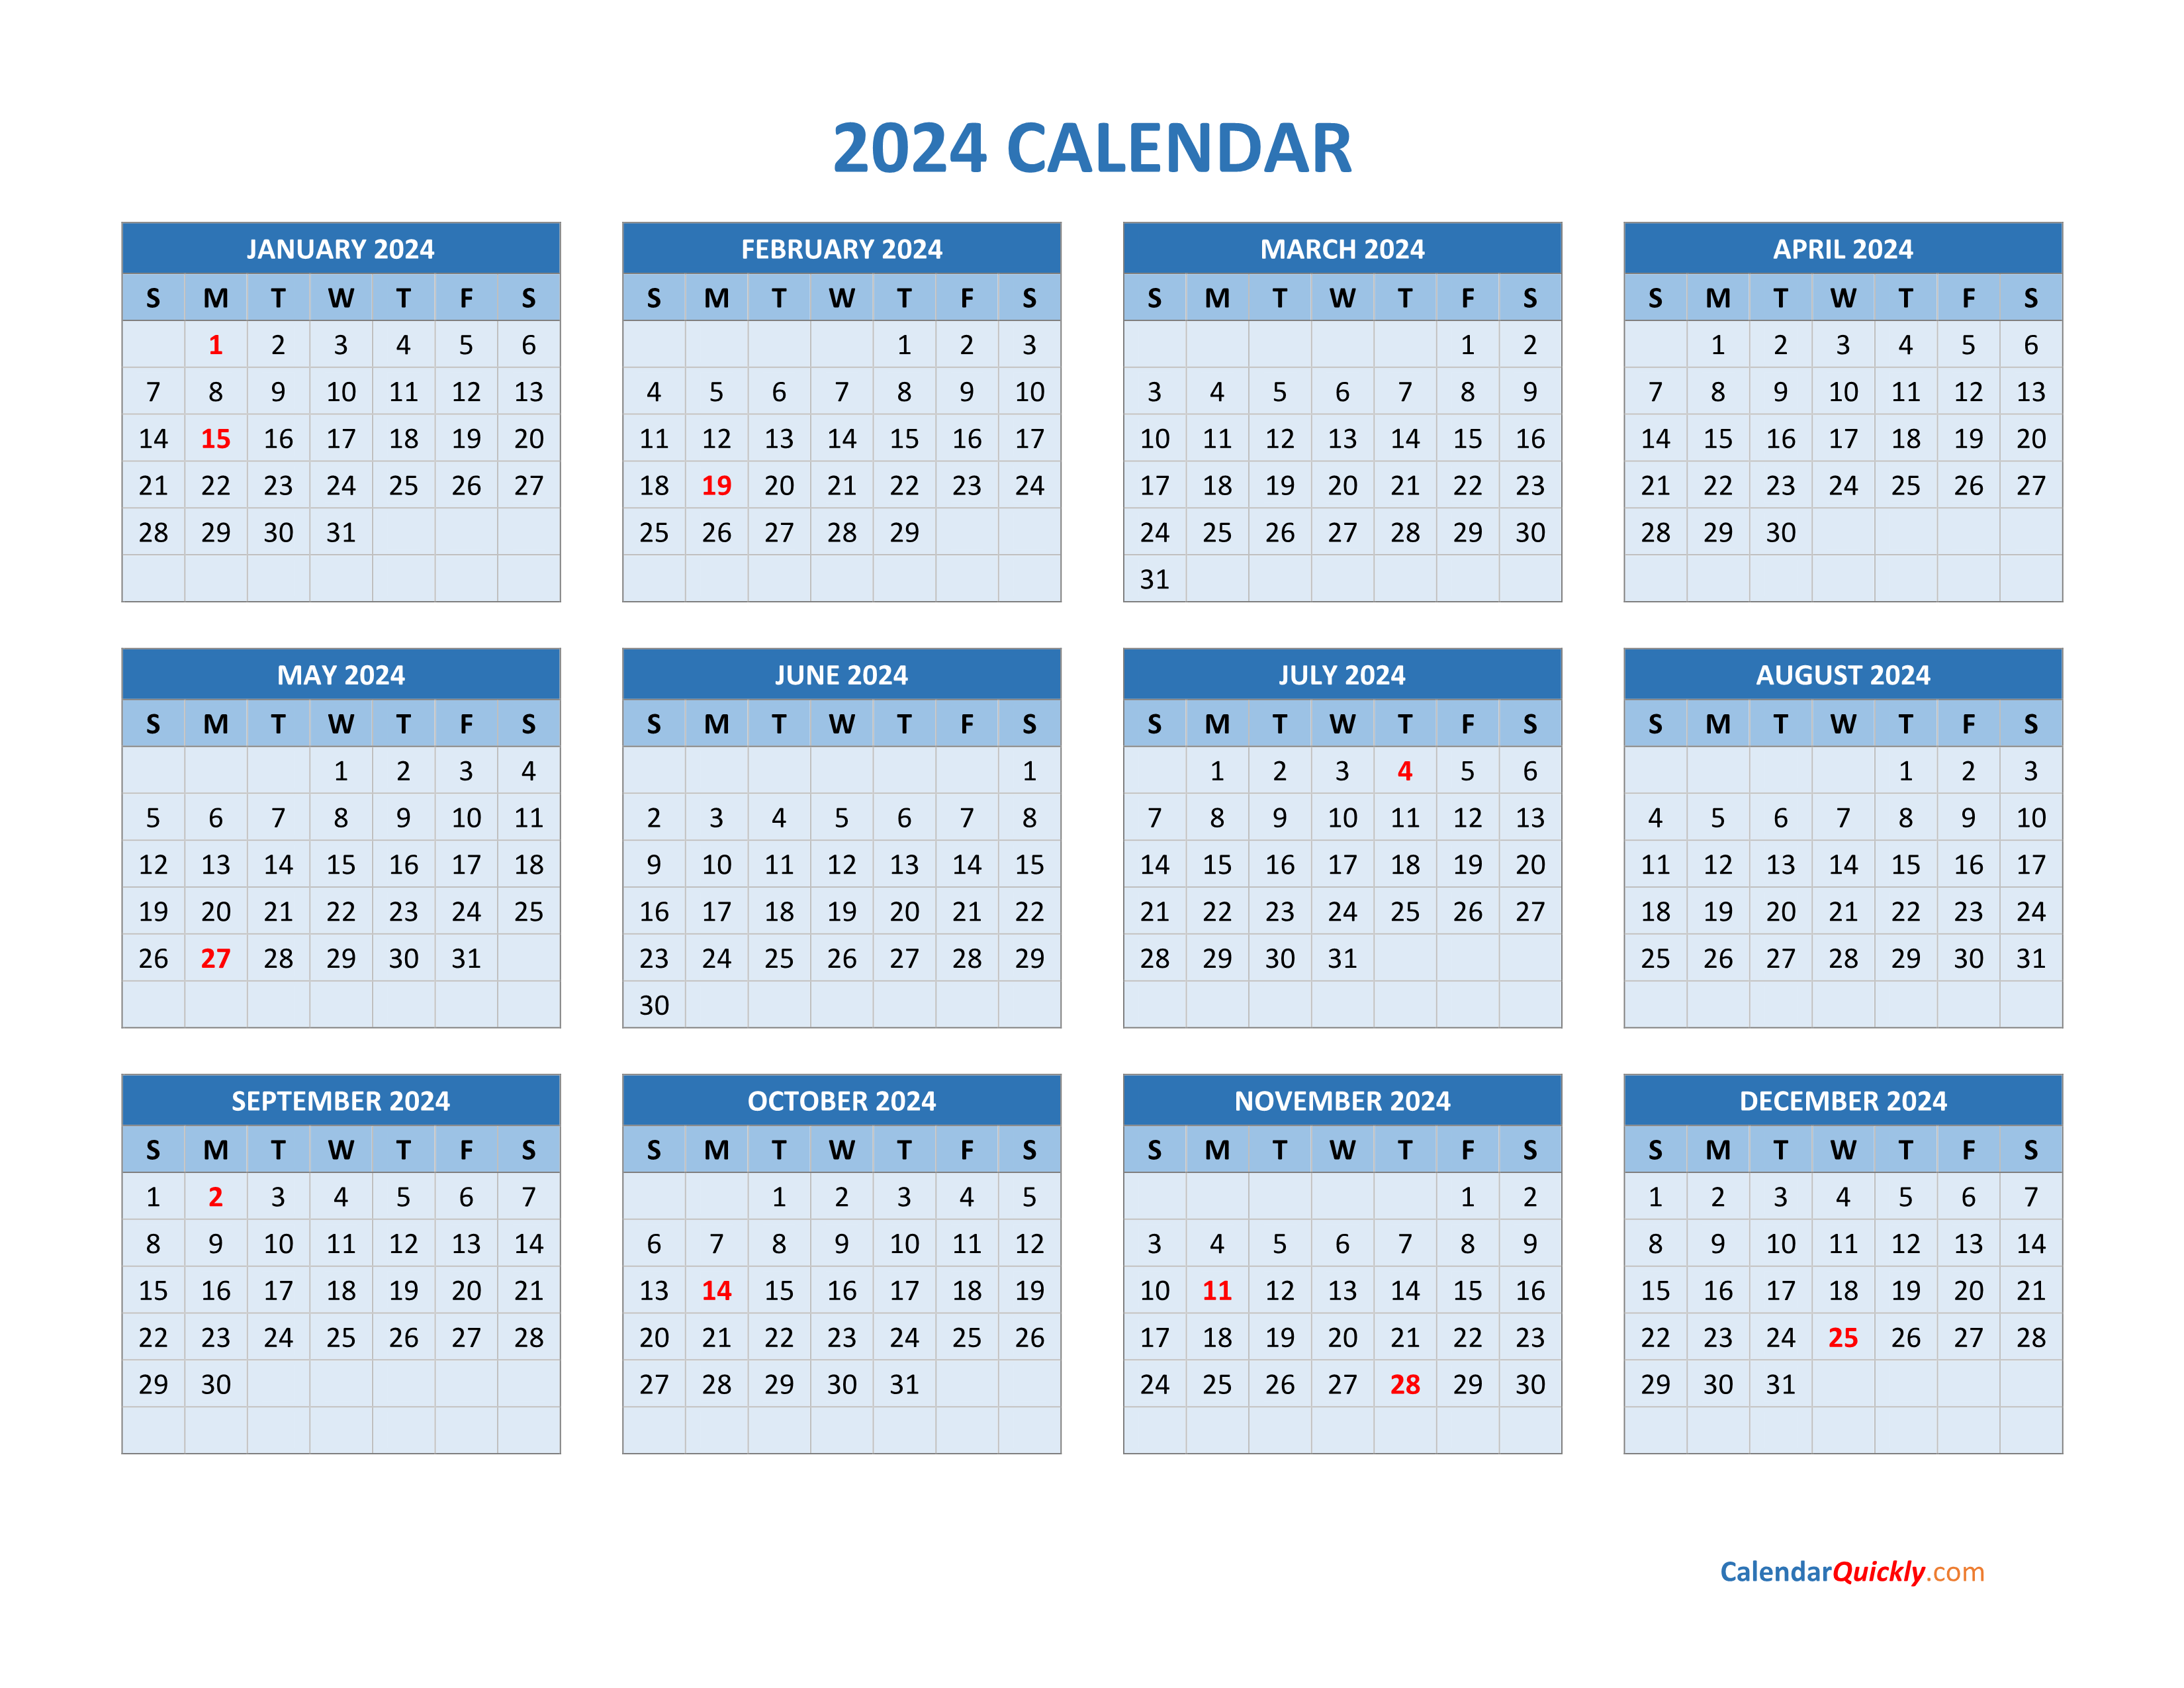 2024 Printable Calendar By Month - Free Printable 2024 Calendar Month By Month